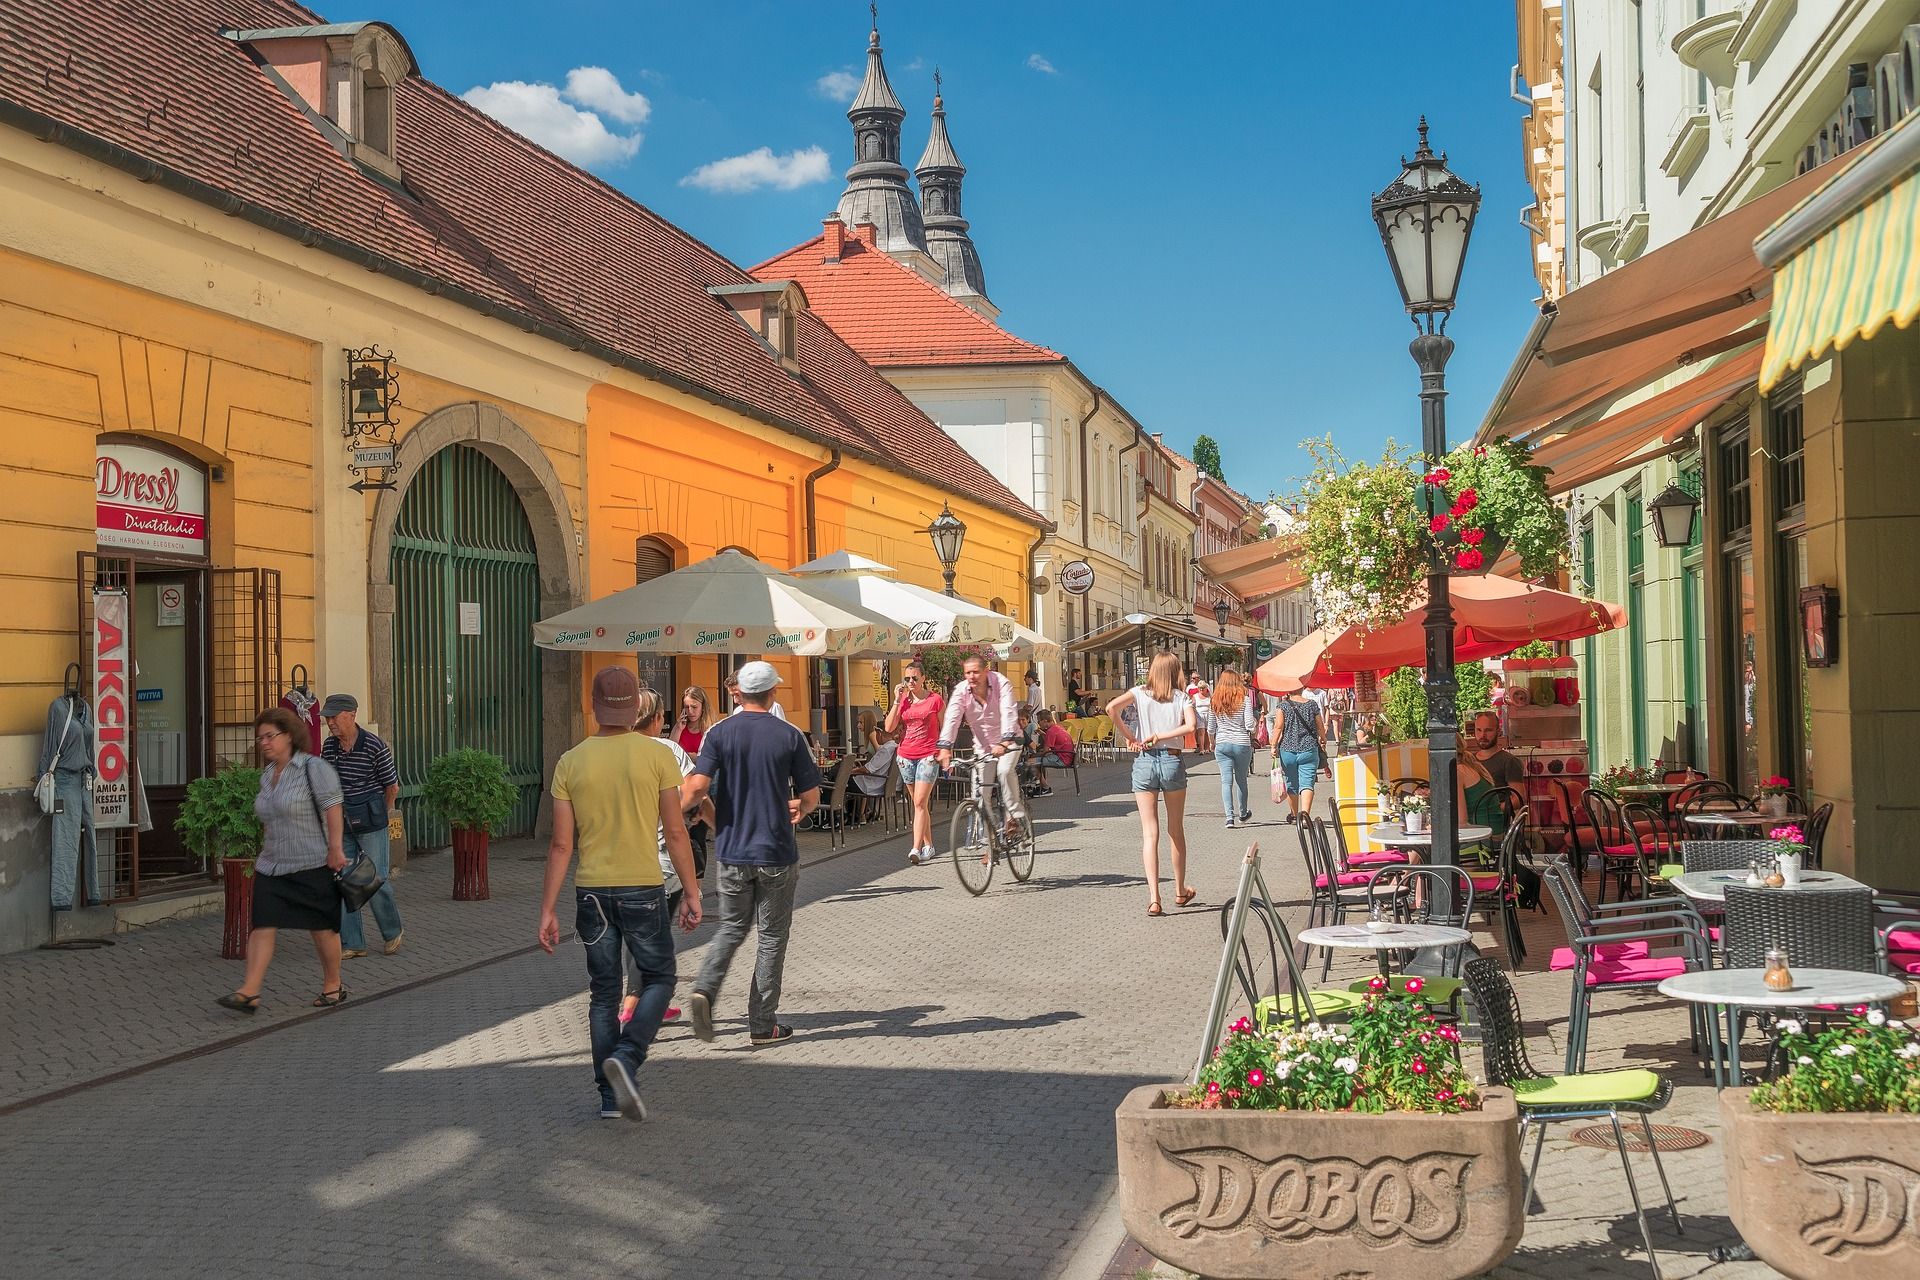 Eger, a city in Hungary